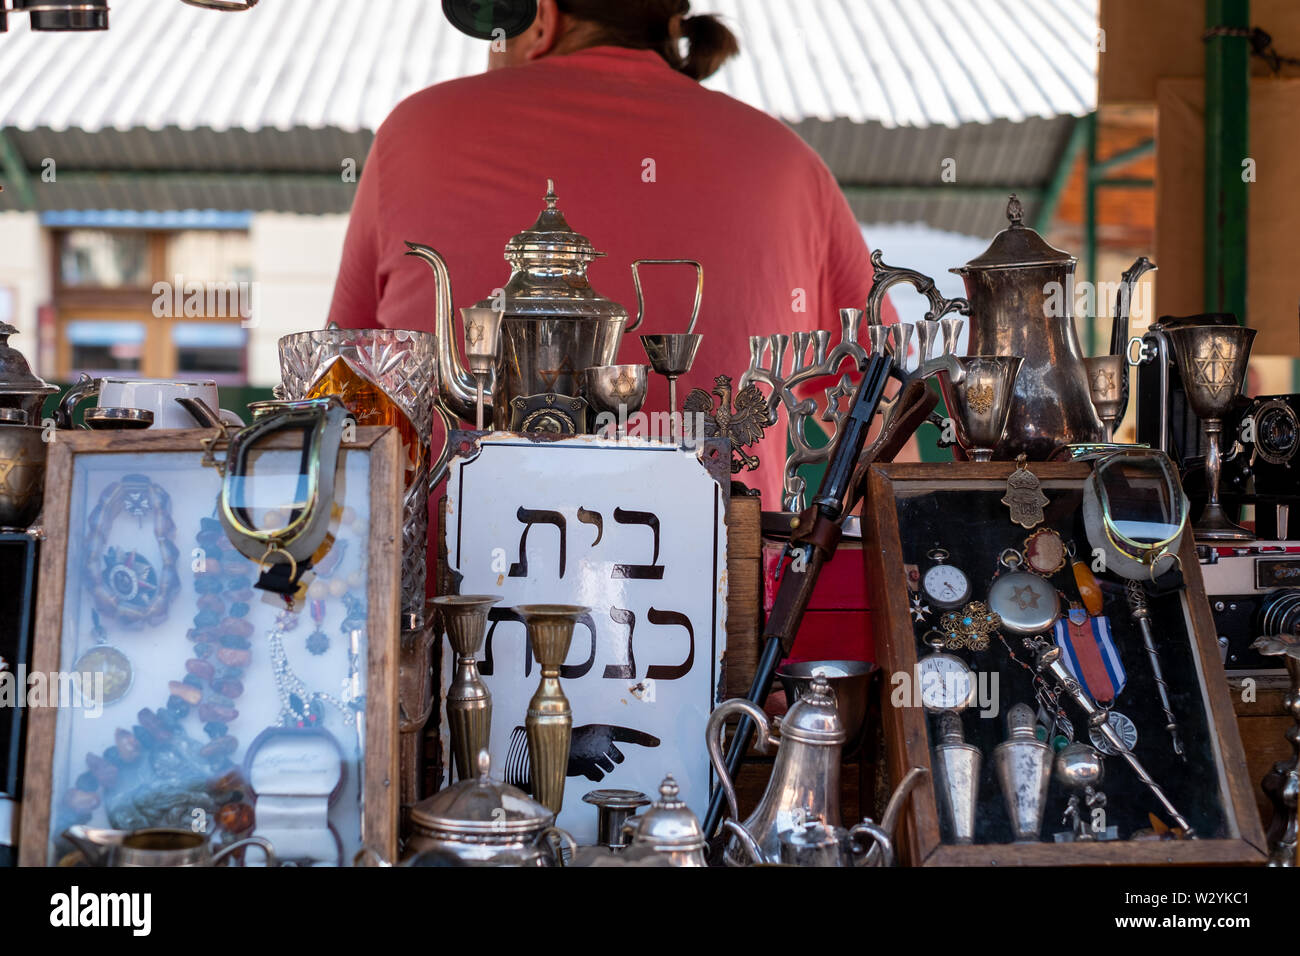 Market stall catering to tourists, selling Judaica and vintage items of Jewish interest, in New Square, in Kazimierz, Krakow, Poland Stock Photo